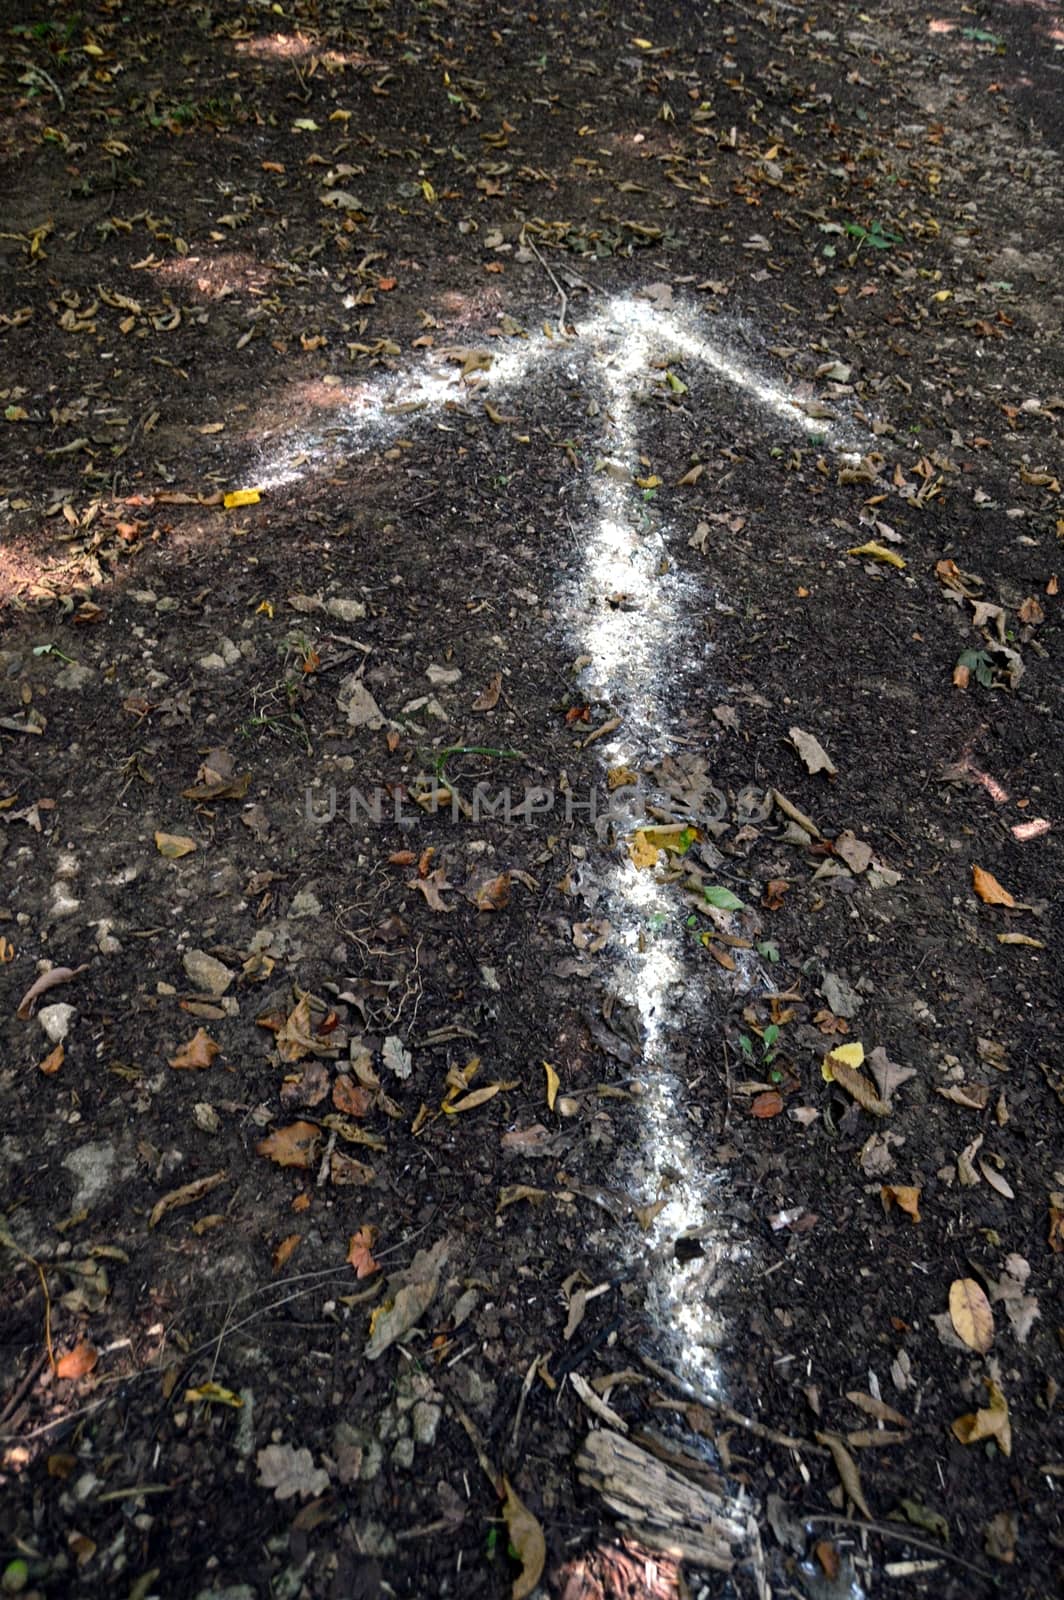 White arrow painted on the ground on a path of a wood.